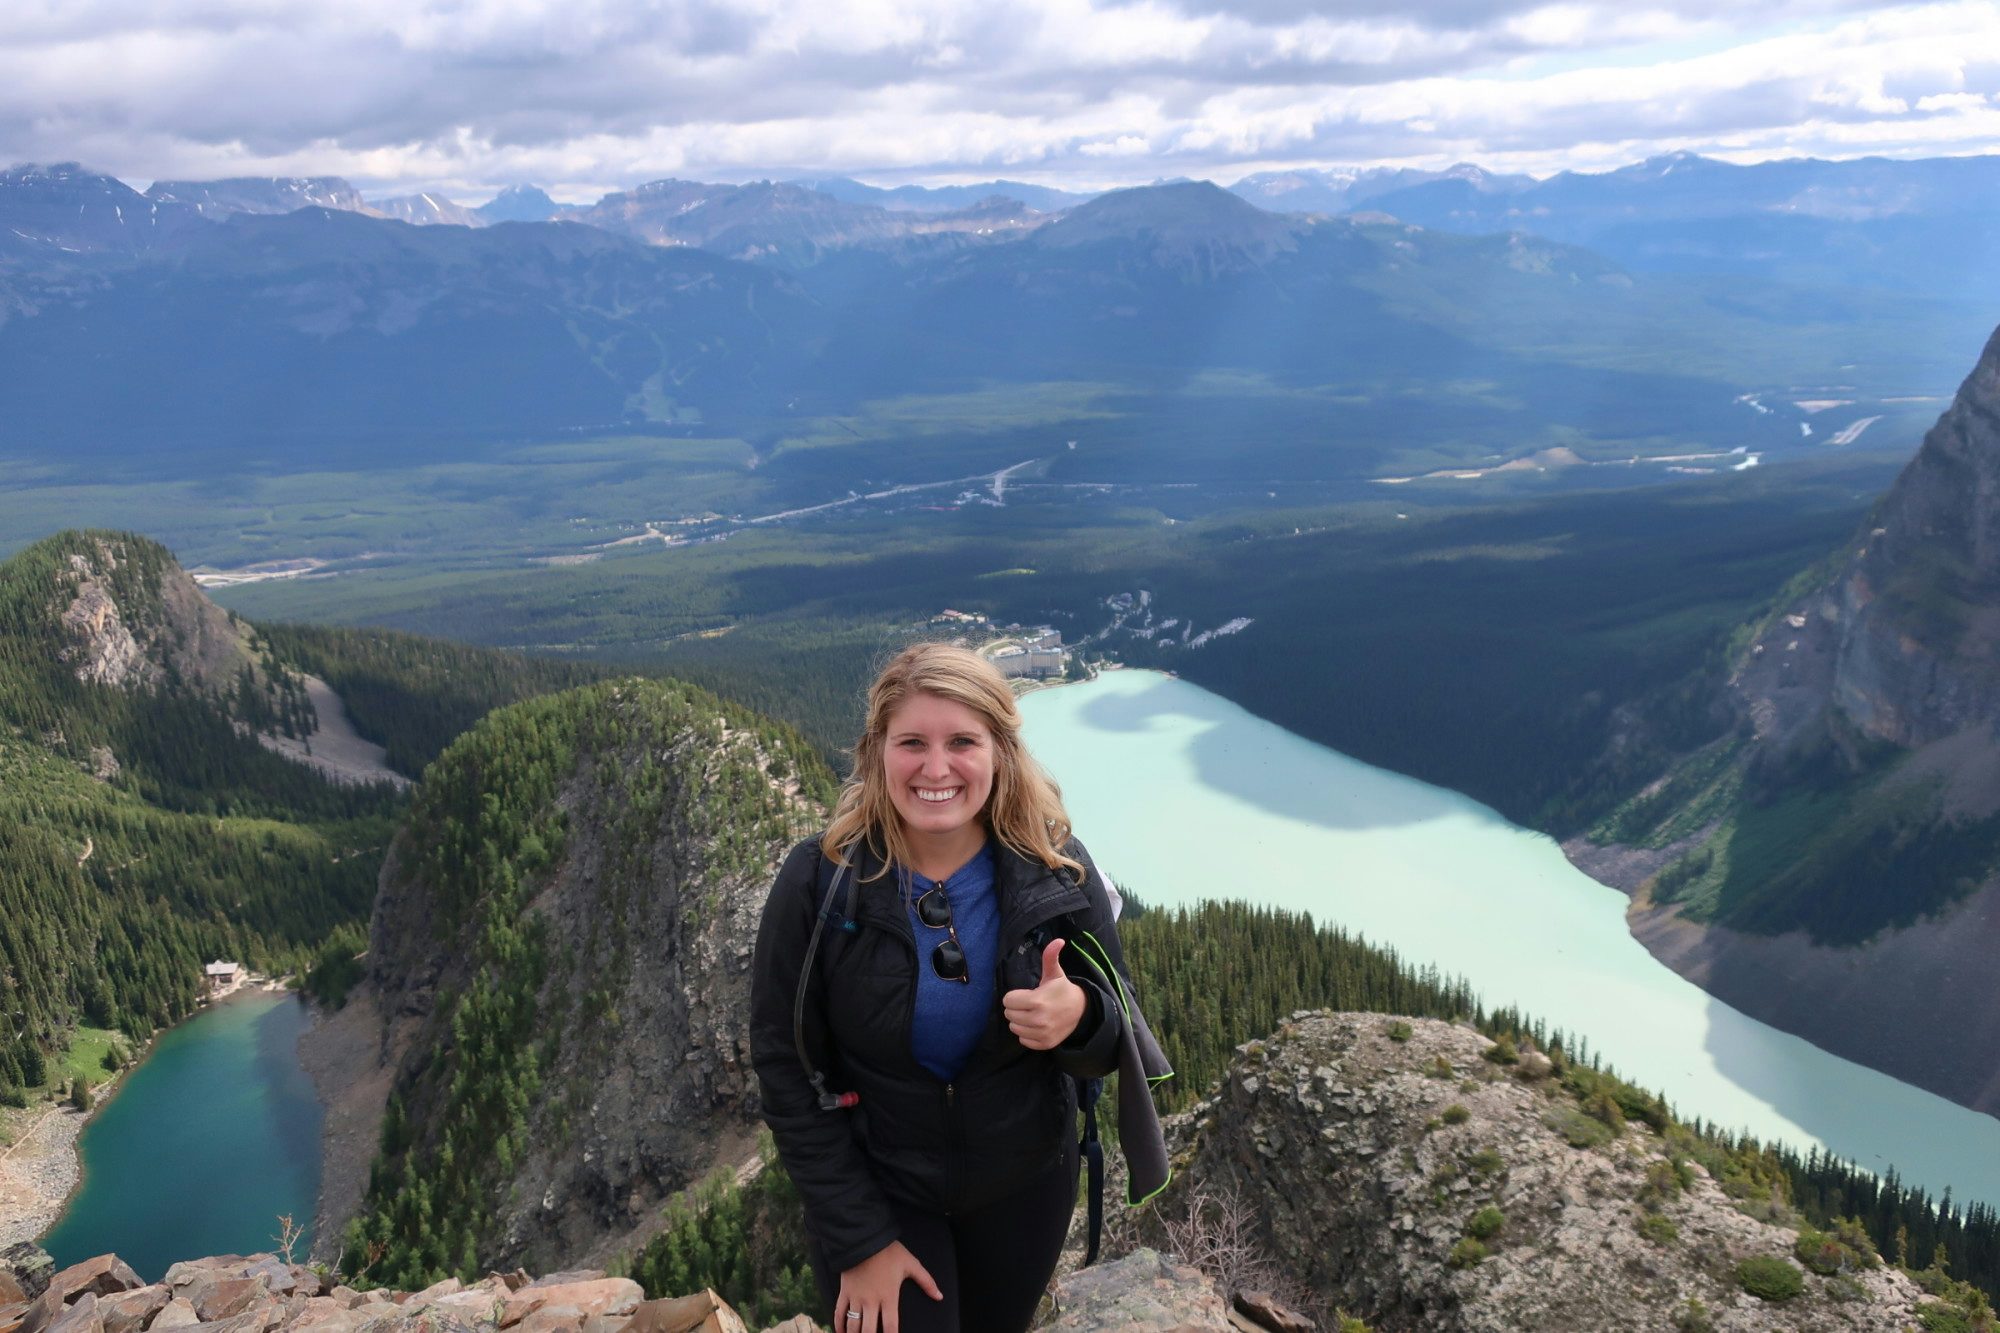 Travel advisor Kirsten Johansson stands on top of a mountain overlooking a scenic lake.